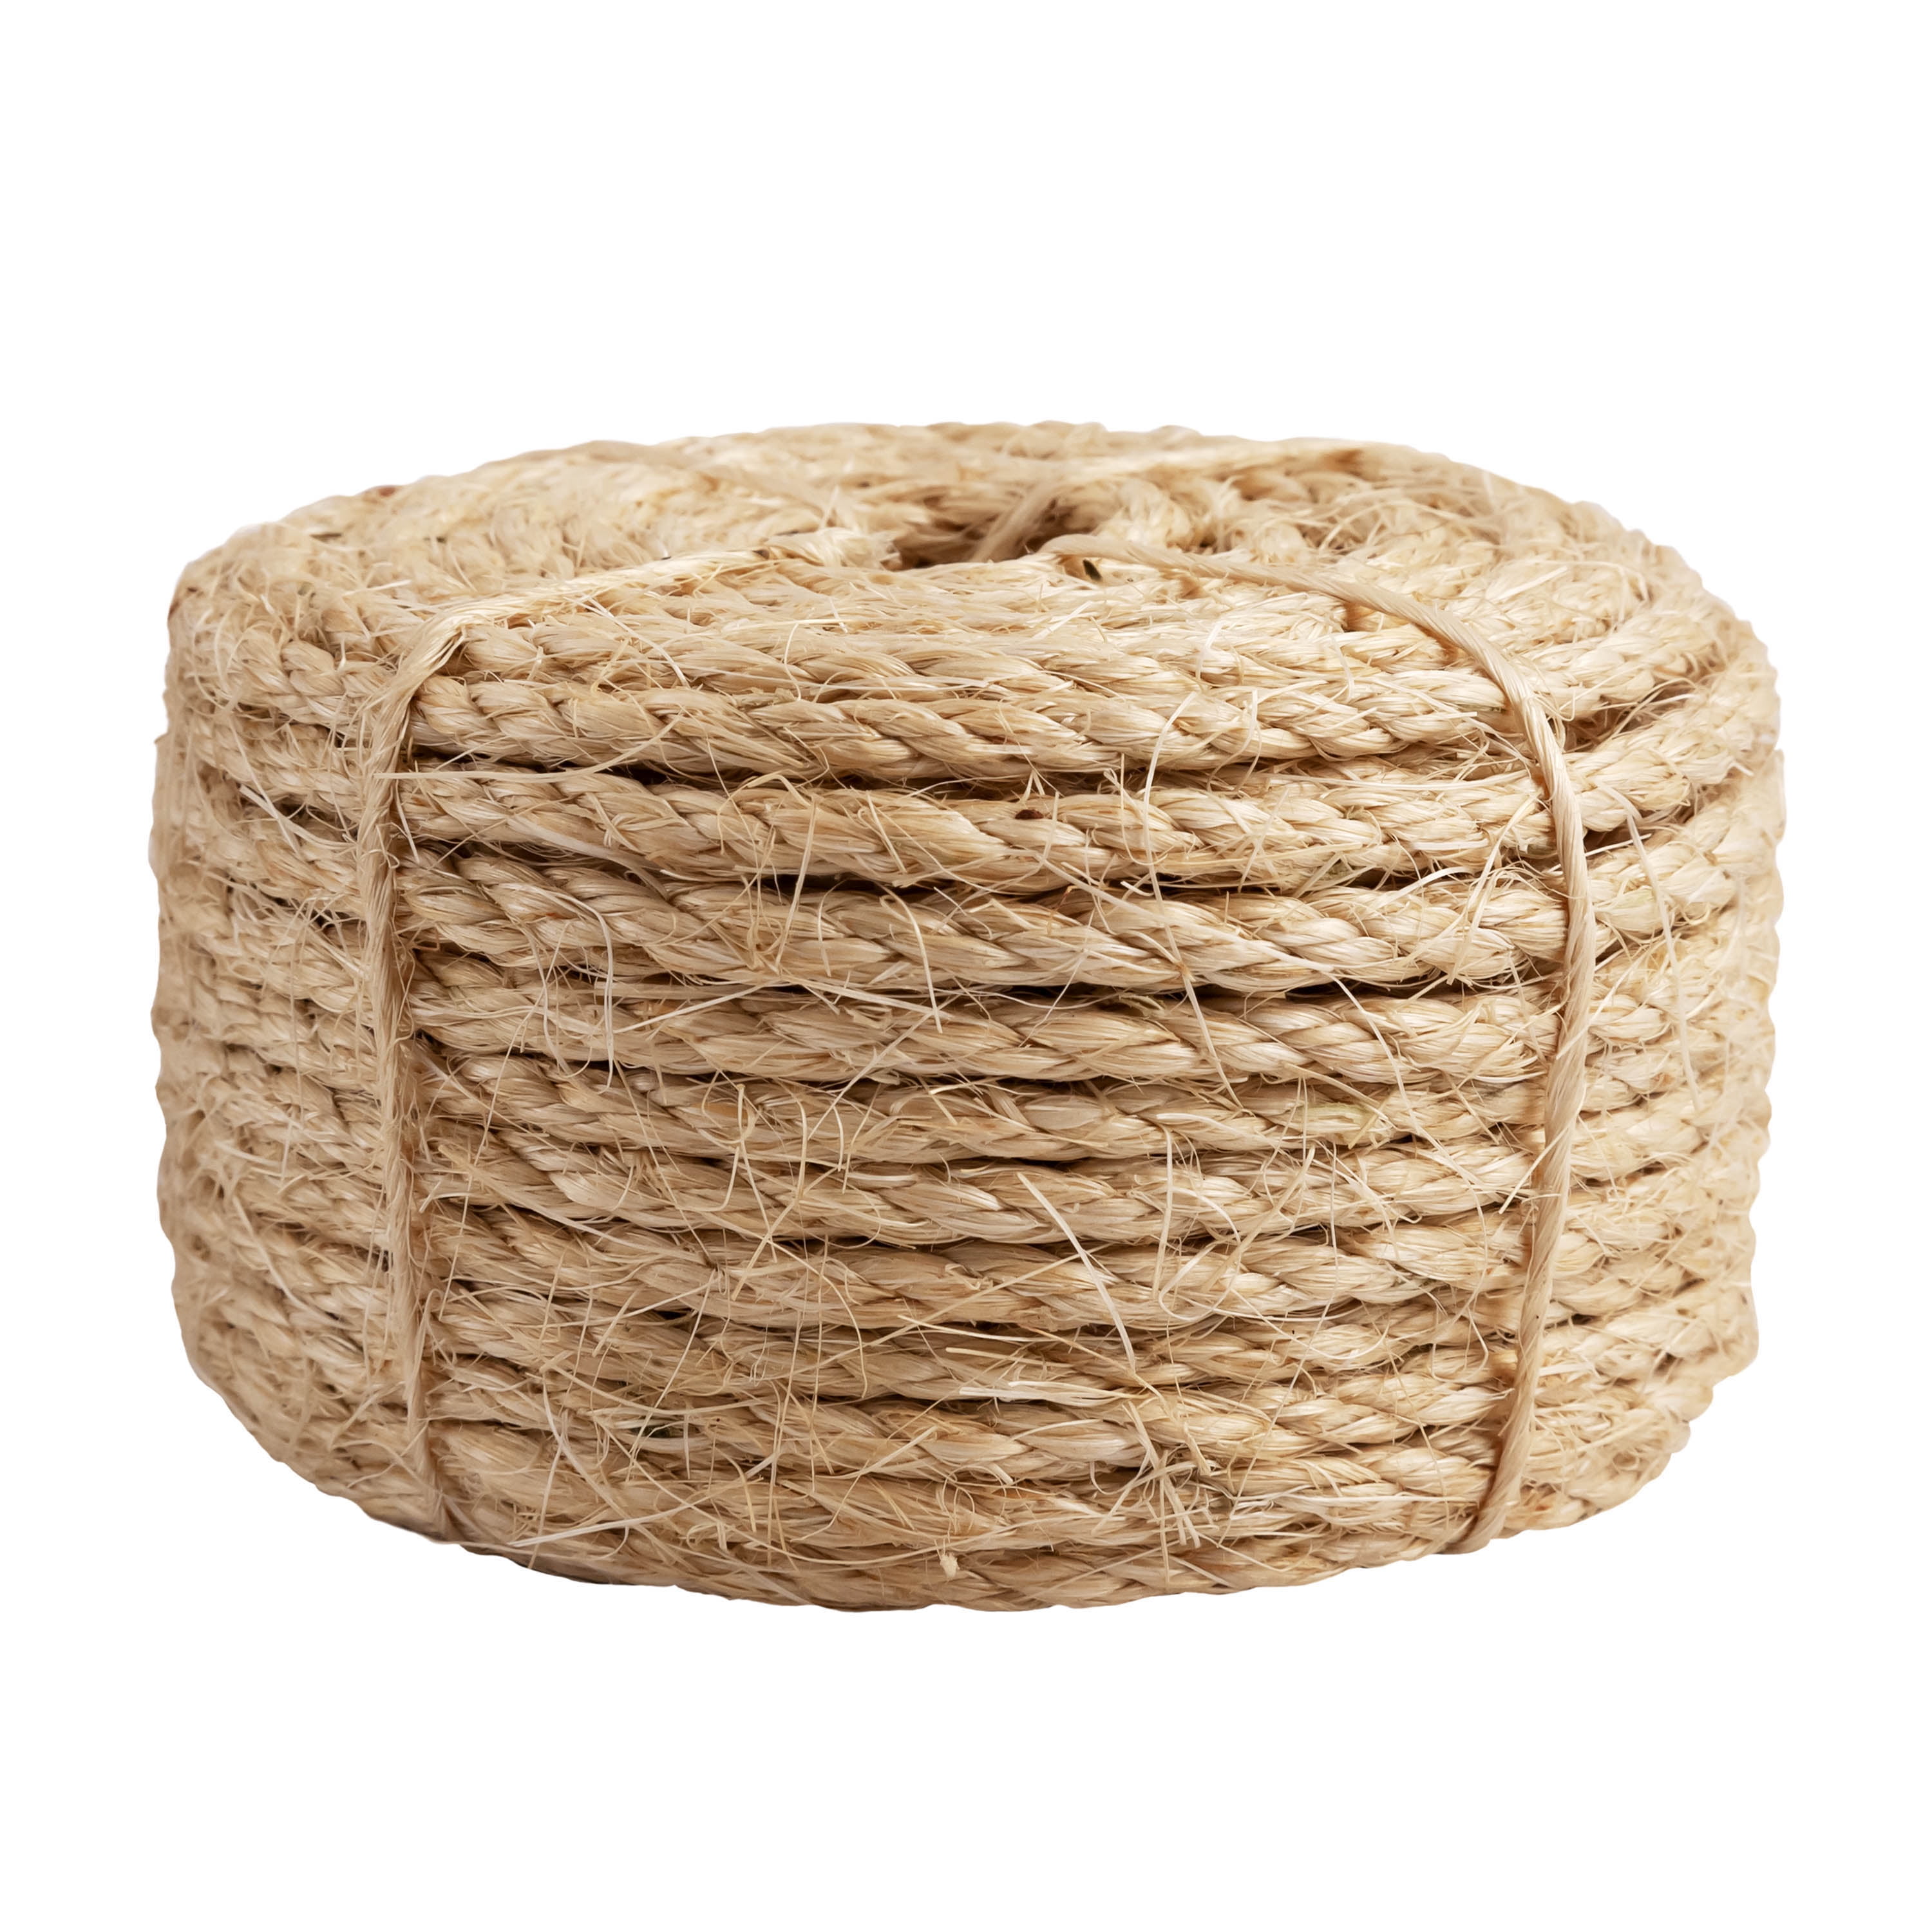 Wicker Chair Moisture/Weather Resistant All Natural Fibers - SGT KNOTS Projects Marine 1/4 inch 10 feet Cat Scratching Post Indoor/Outdoor Decor Twisted Sisal Rope Tie-Downs 